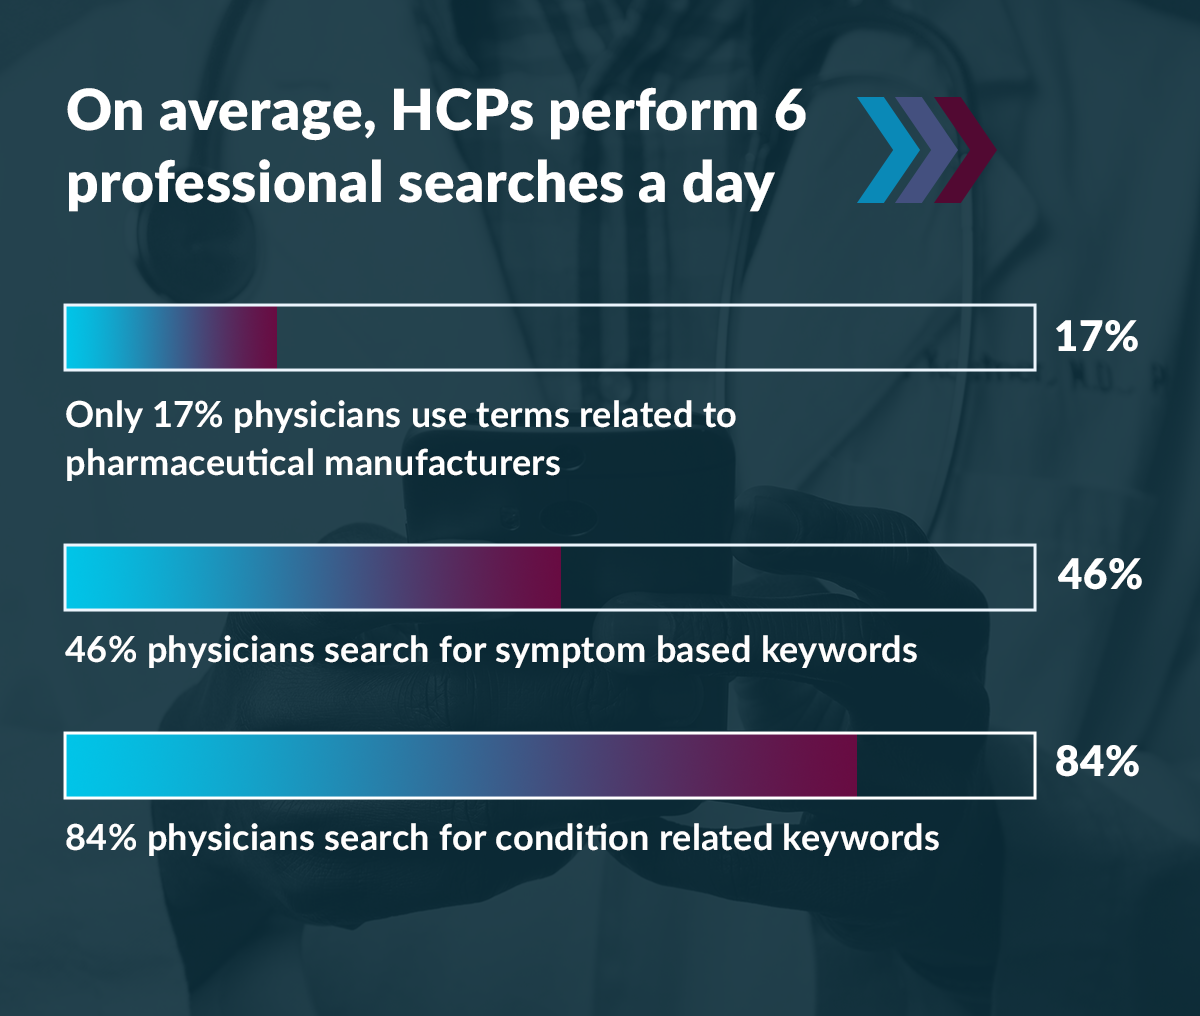 On average, HCPs perform 6 professional searches a day. Only 17% physicians use terms related to pharmaceutical manufacturers. 46% physicians search for symptom based keywords. 84% physicians search for condition related keywords.